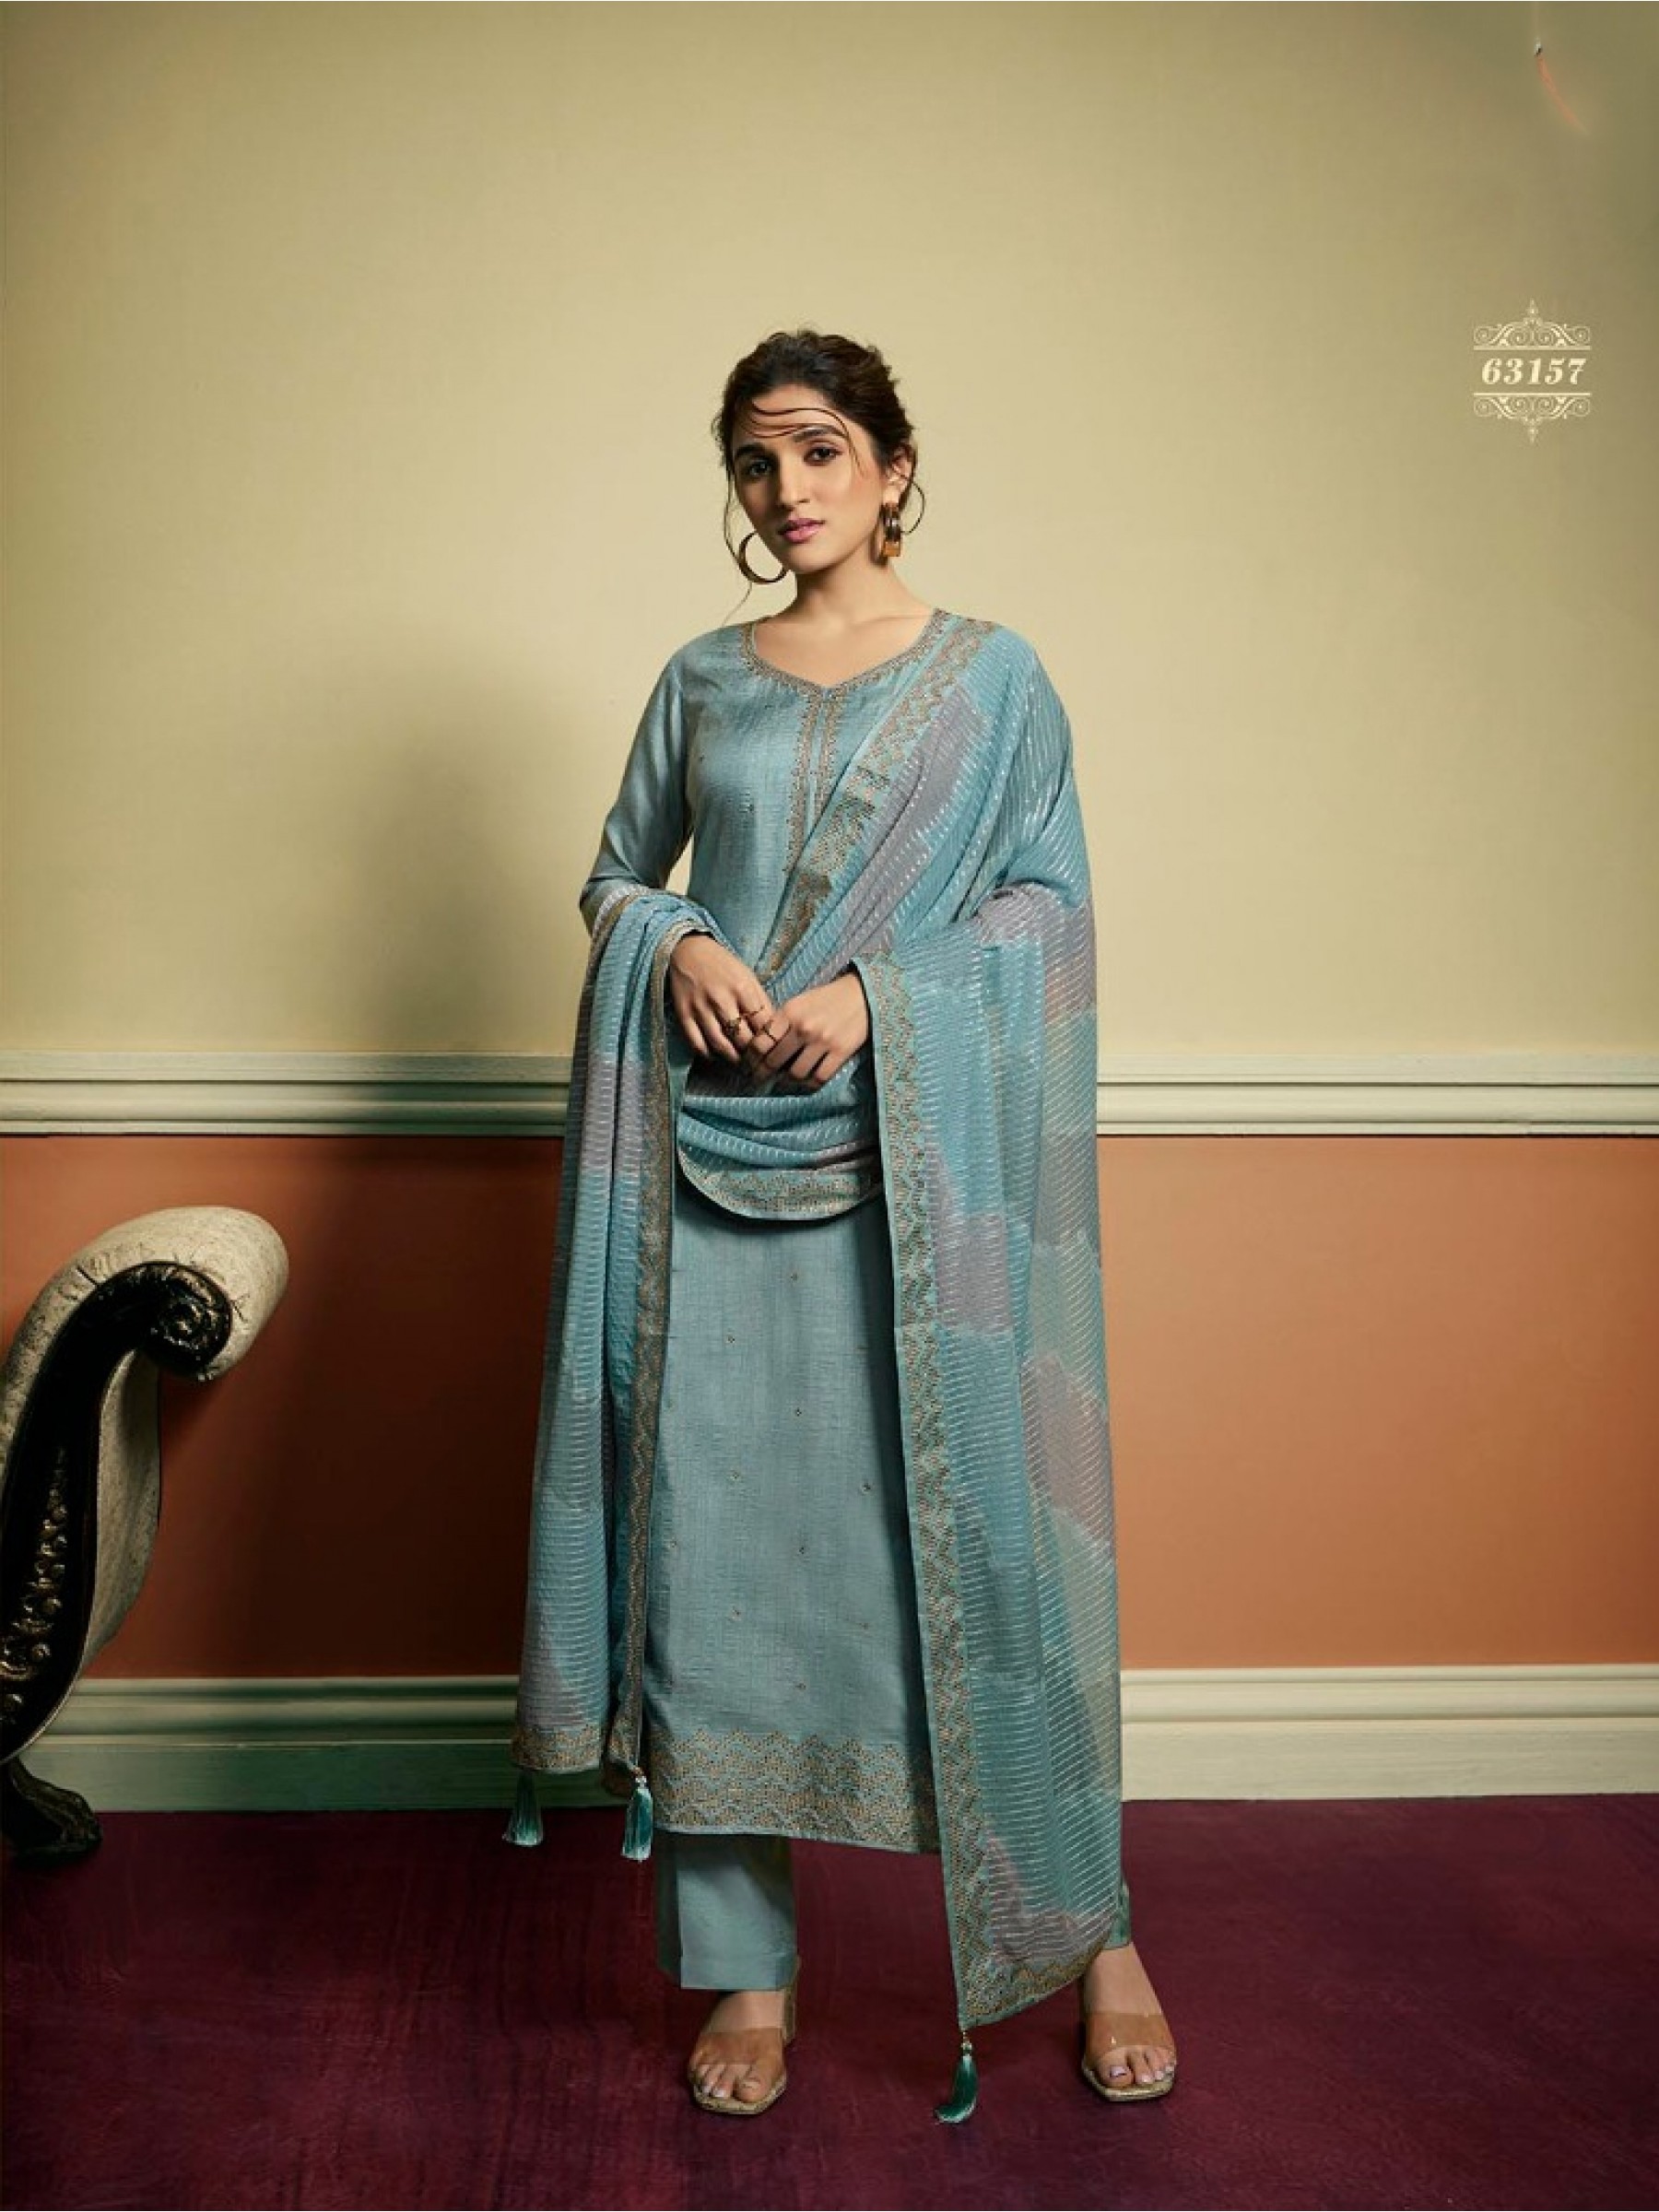 Pure Dola Silk Party Wear Suit in Sea Blue Color with Swarovski Work